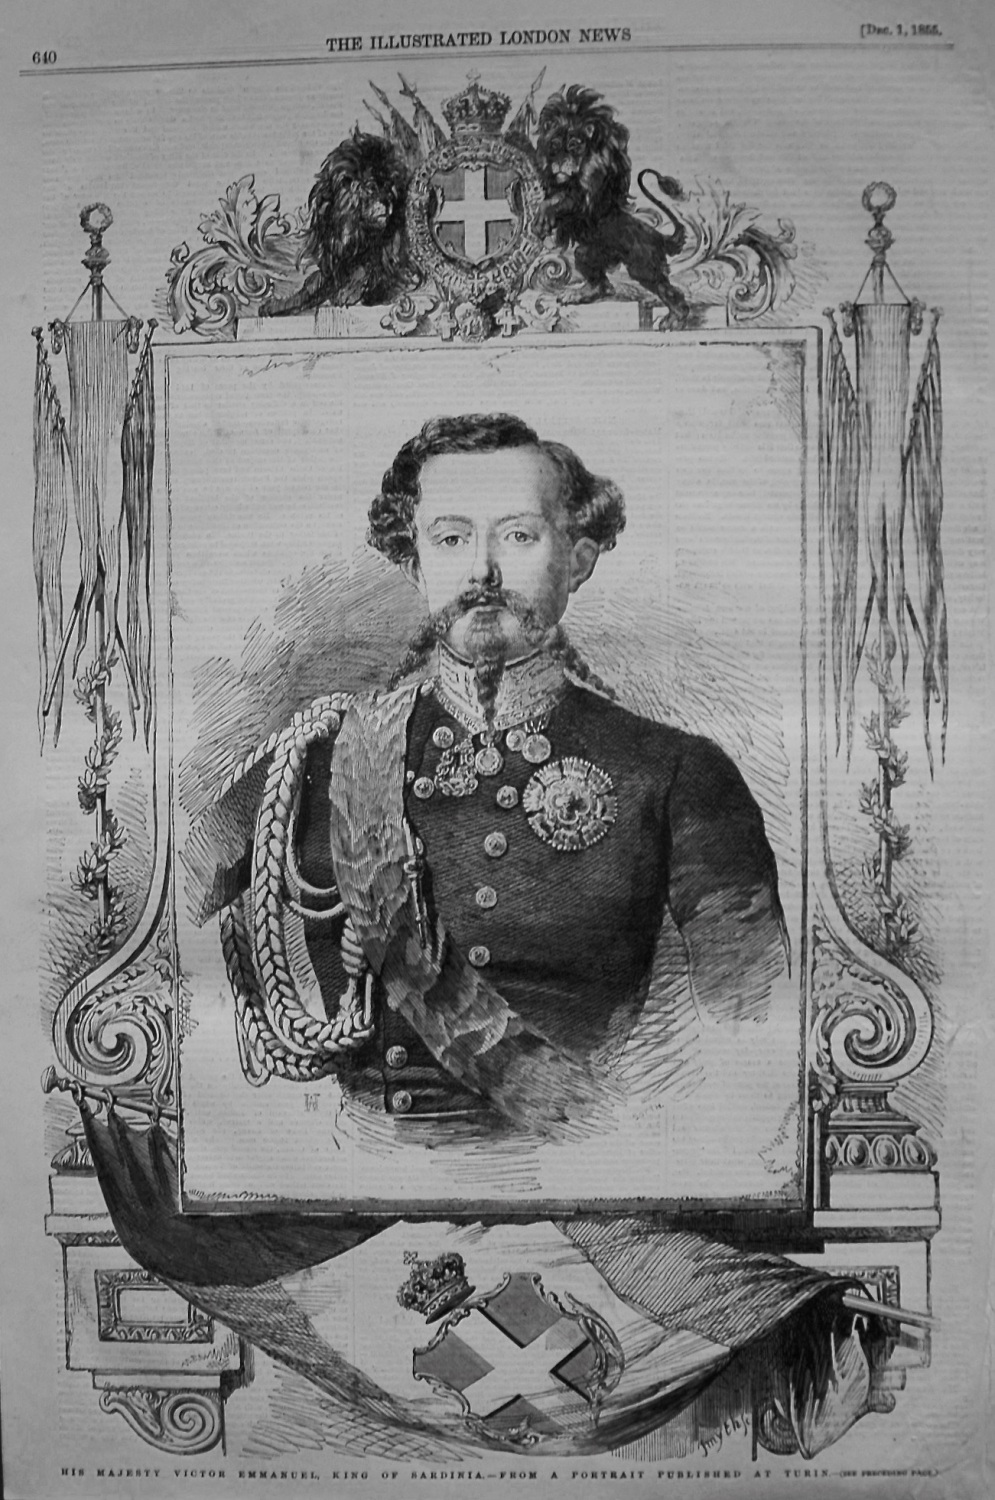 His Majesty Victor Emmanuel, King of Sardinia.- from a Portrait Published a